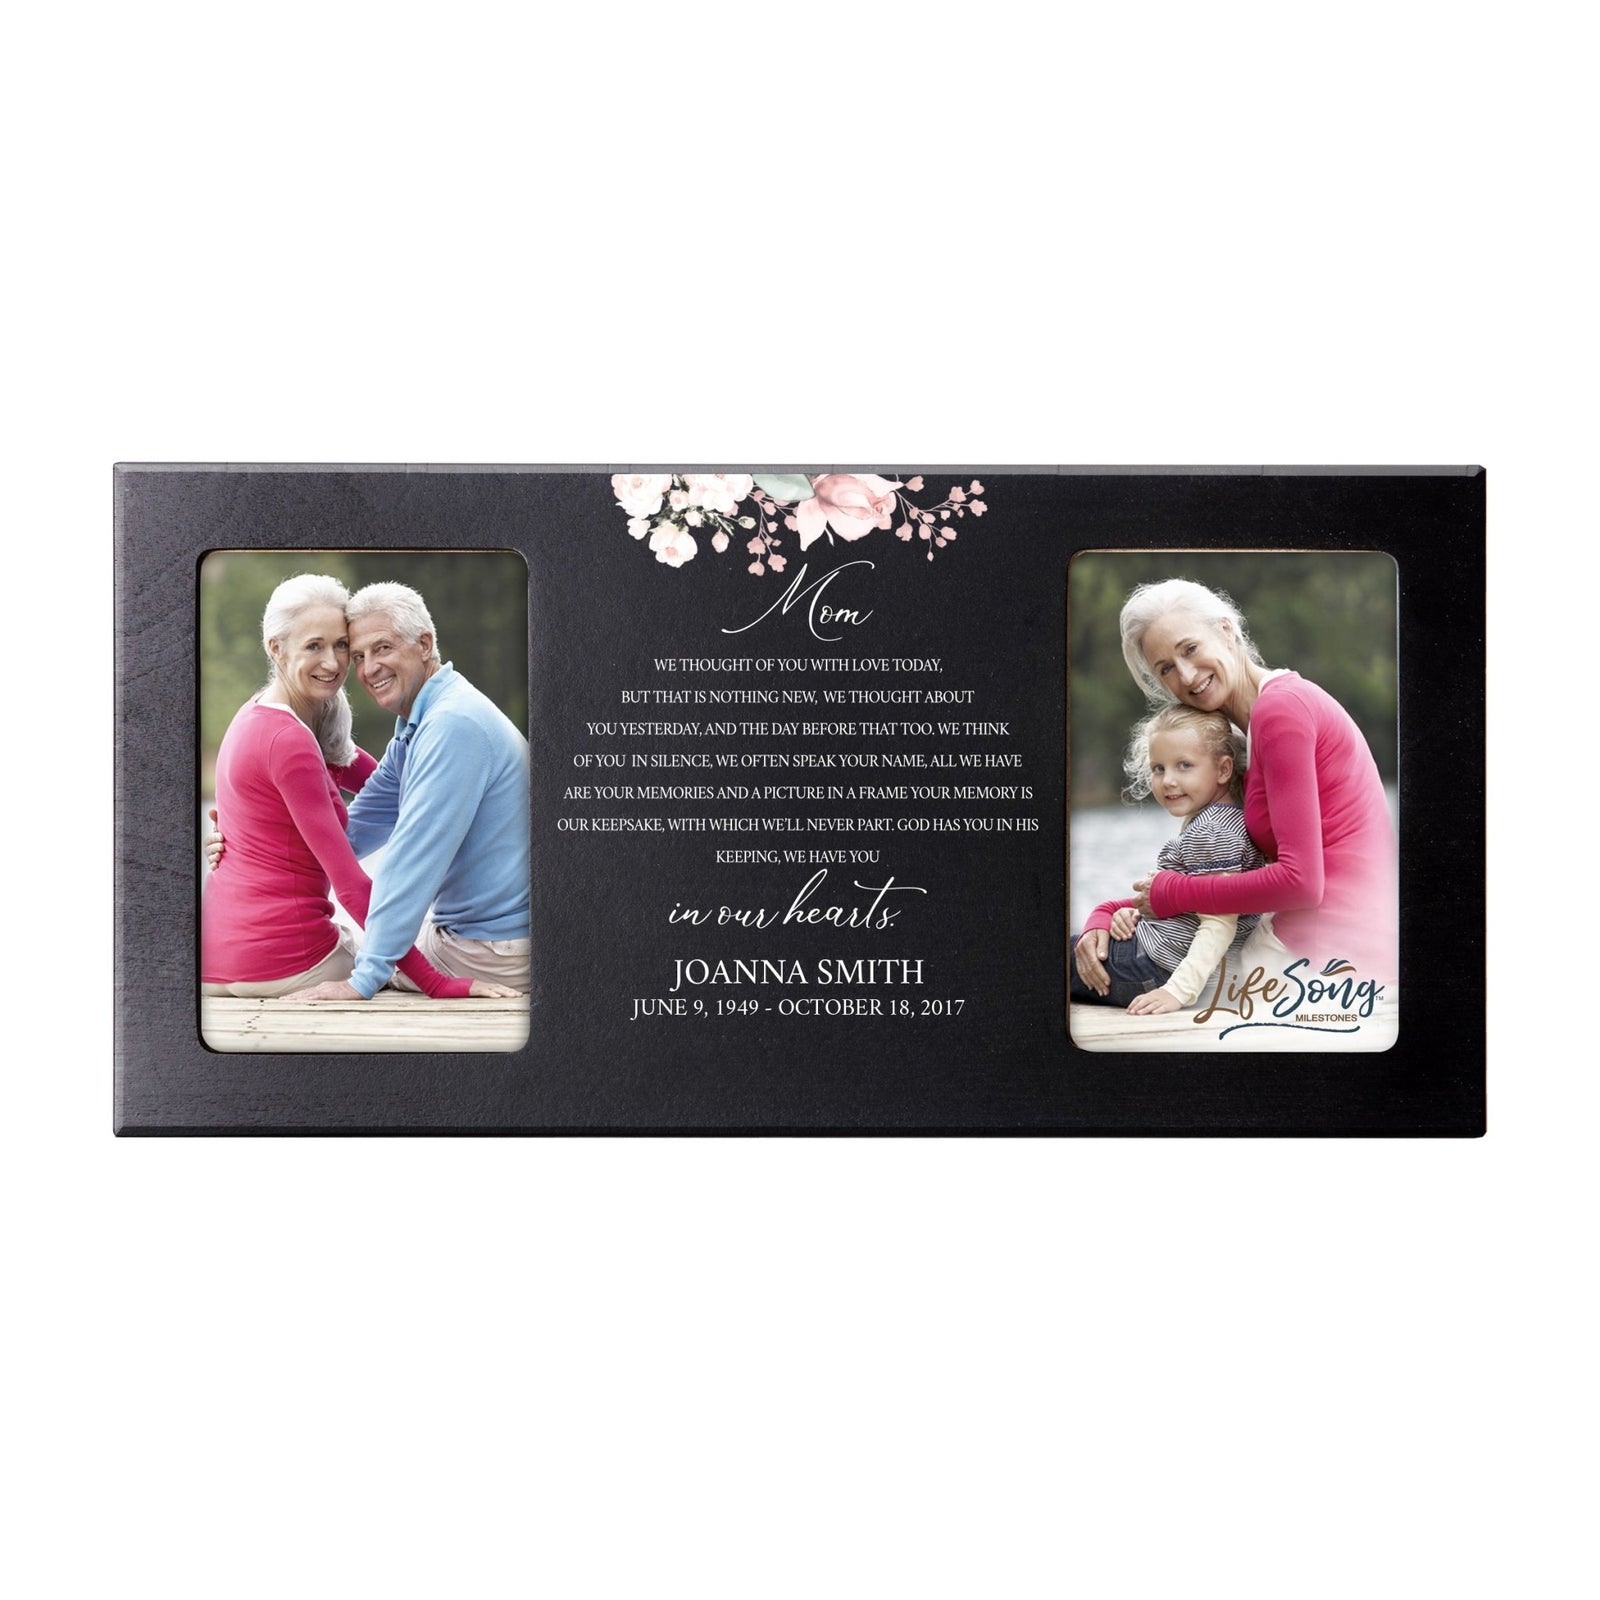 Custom Memorial Picture Frame 16x8in Holds Two 4x6in Photos - Mom, We Thought Of You - LifeSong Milestones